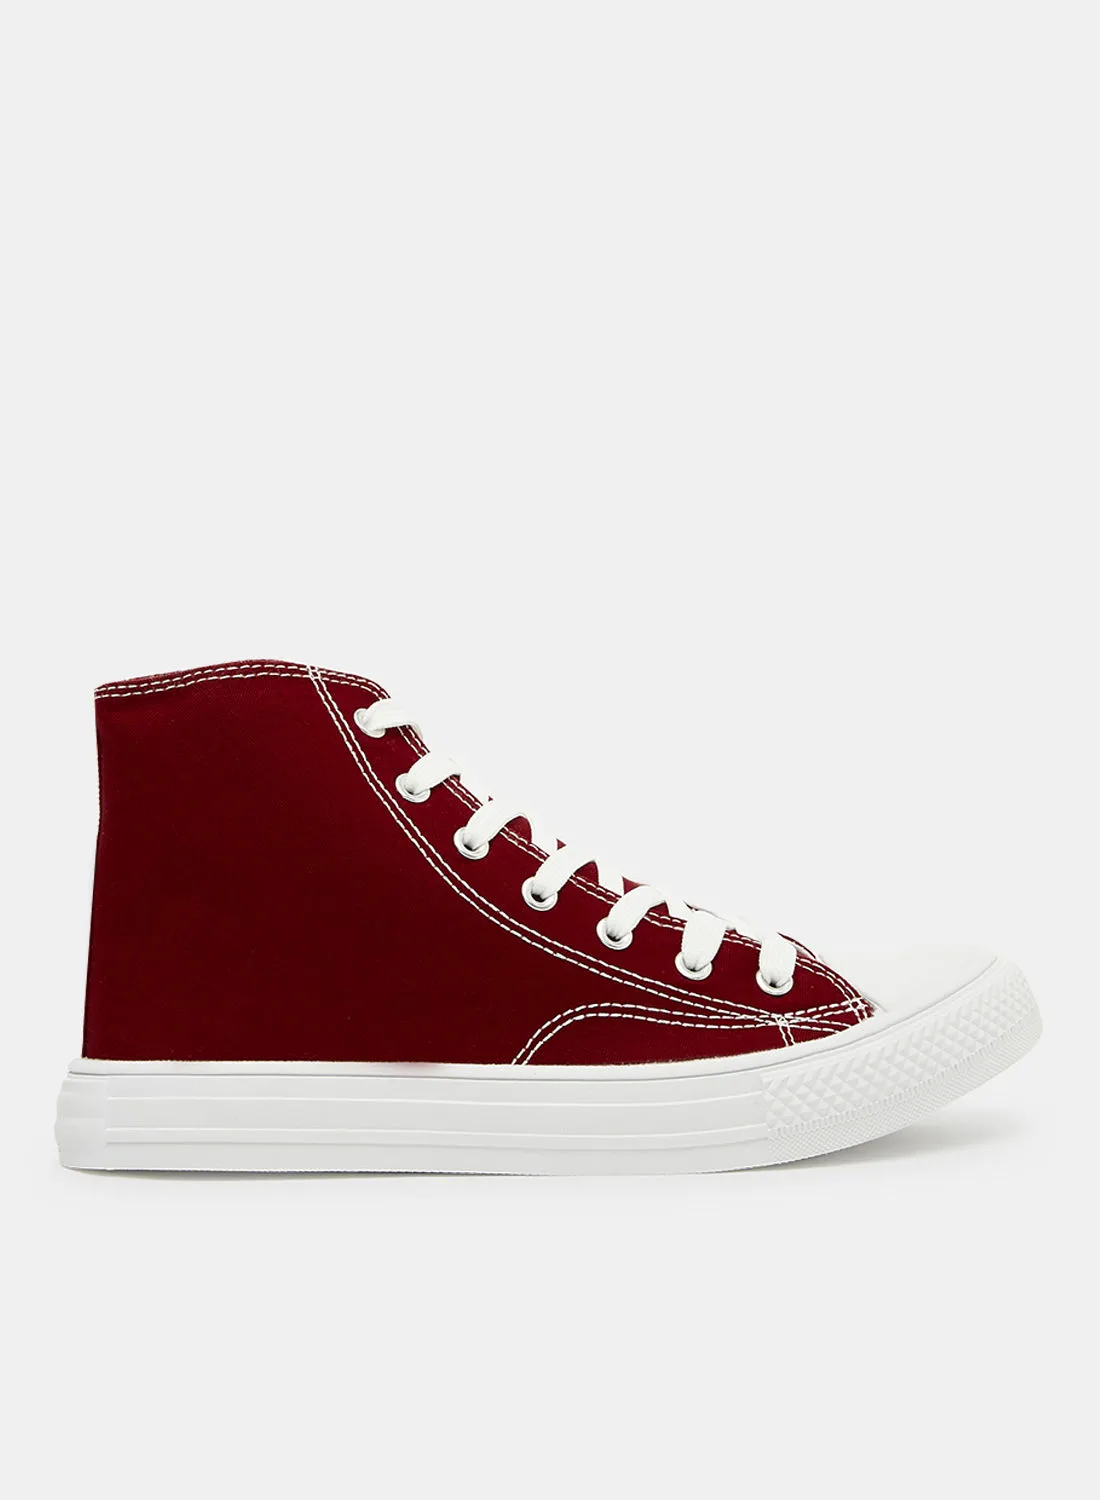 LABEL RAIL High Top Canvas Sneakers Red